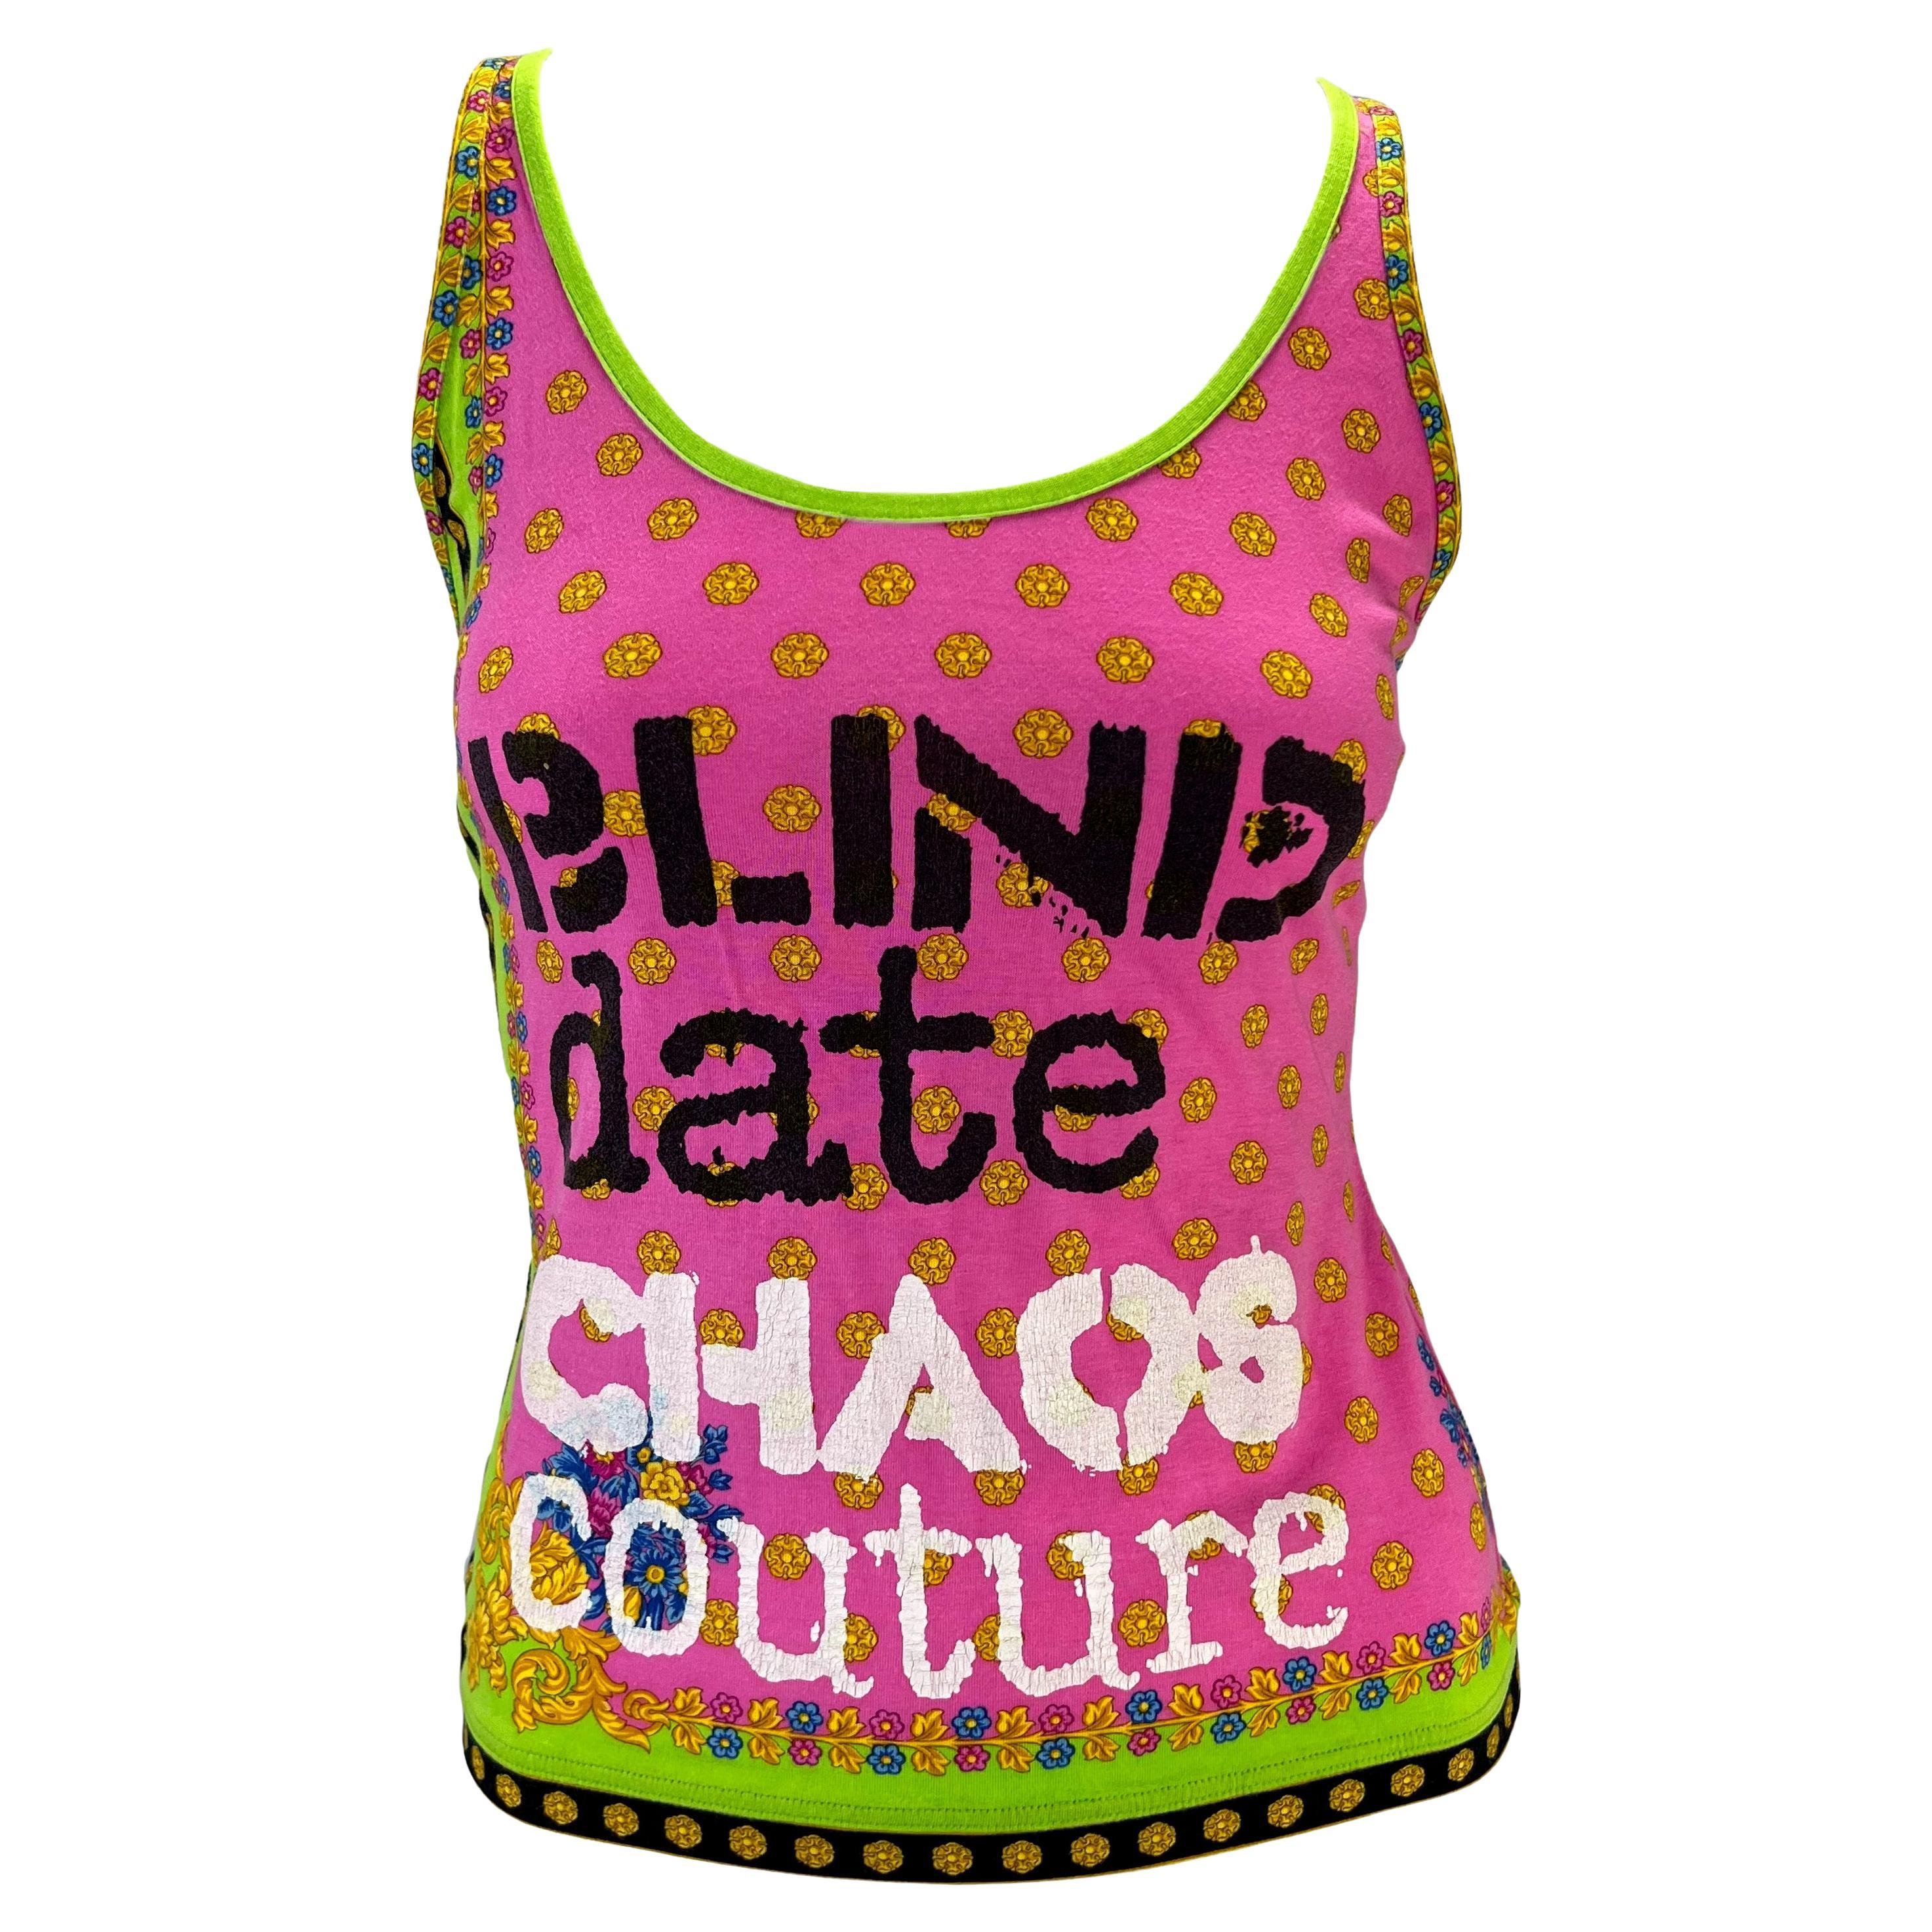 S/S 2005 Versace by Donatella Chaos Couture Print Pink Stretch Racer Tank Top